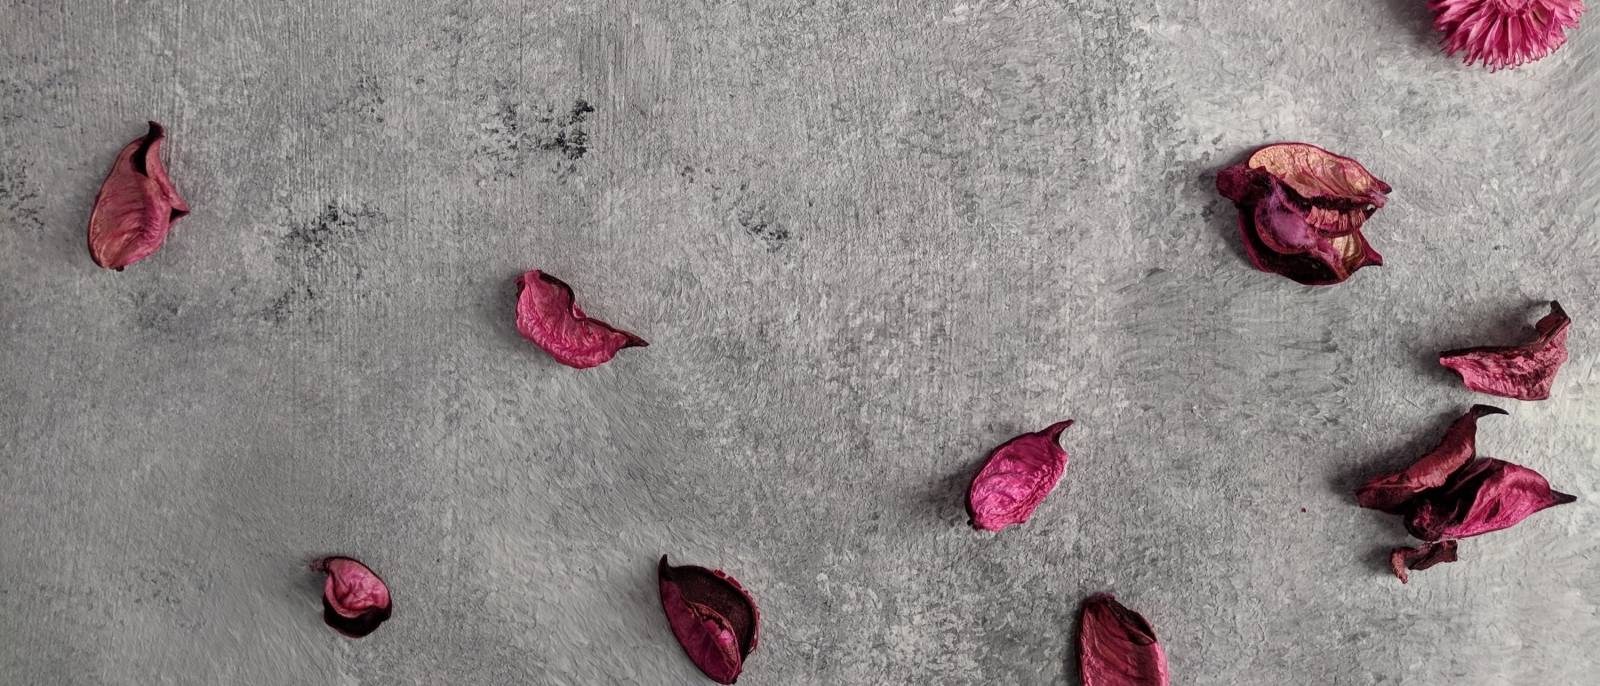 Wilted pink flower petals on concrete